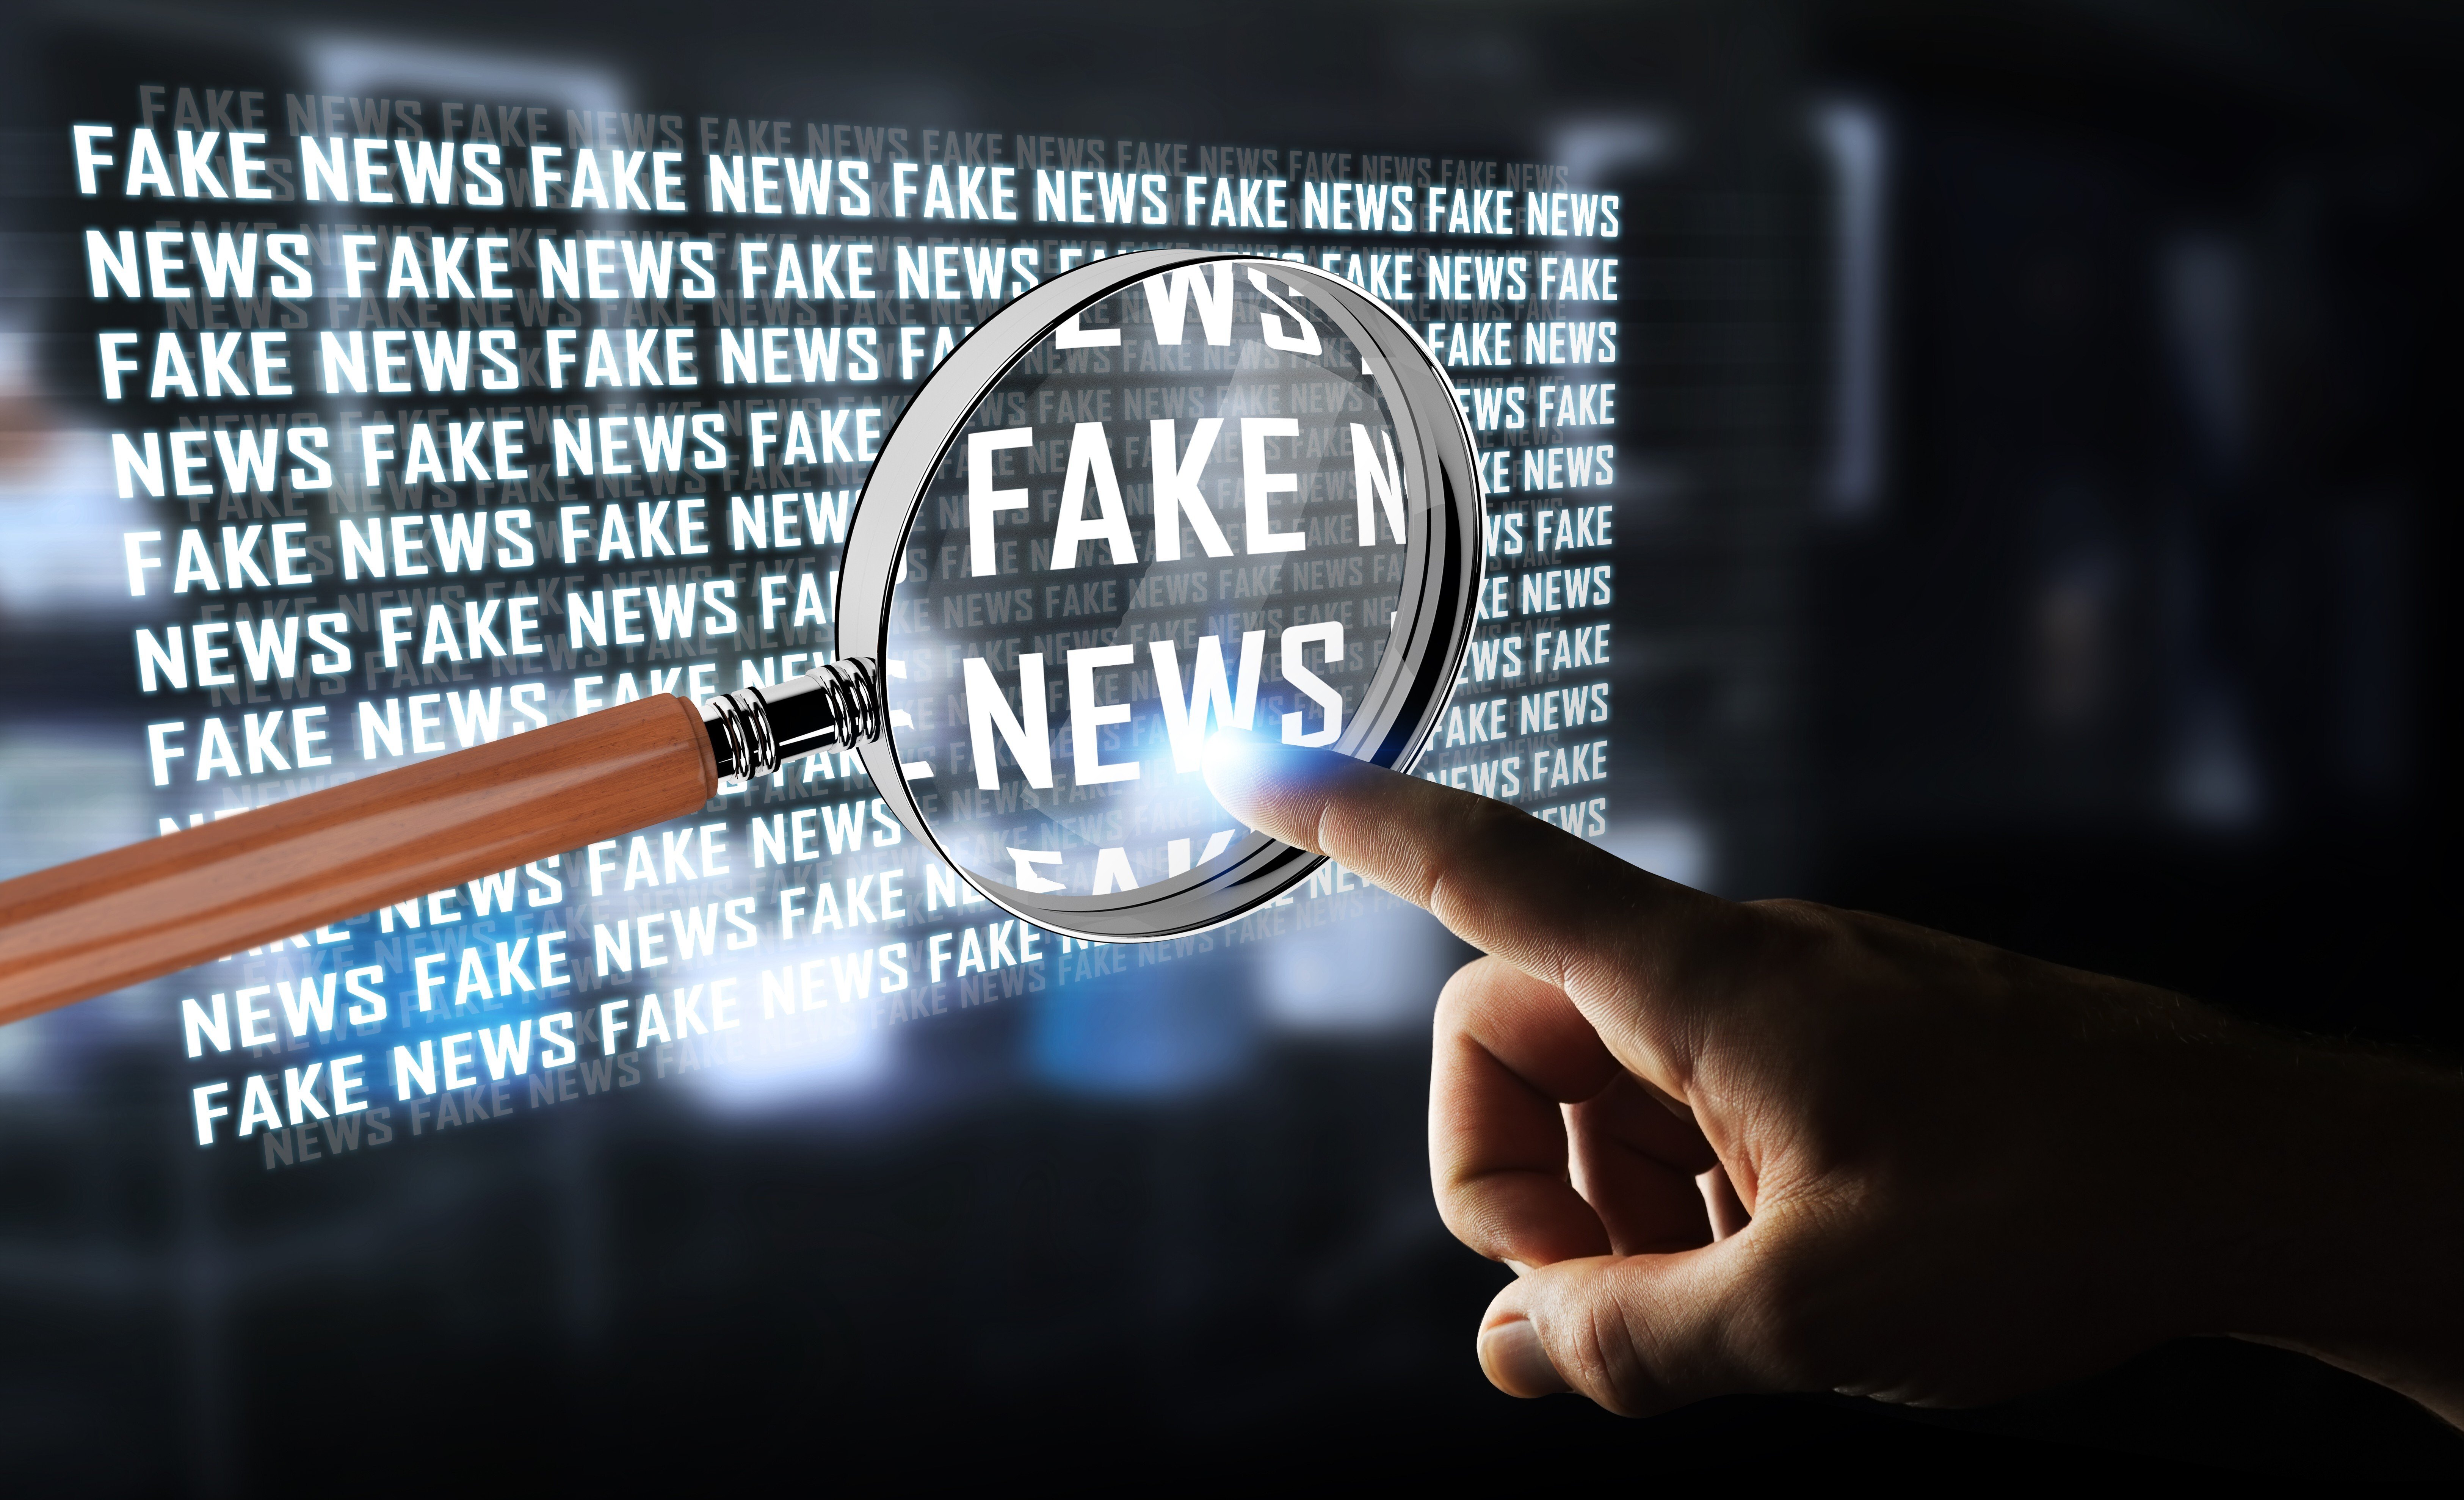 Deepfakes are an extended and hyper-specialised form of fake news that has the potential to threaten government functions and social stability across the world. Photo: Shutterstock